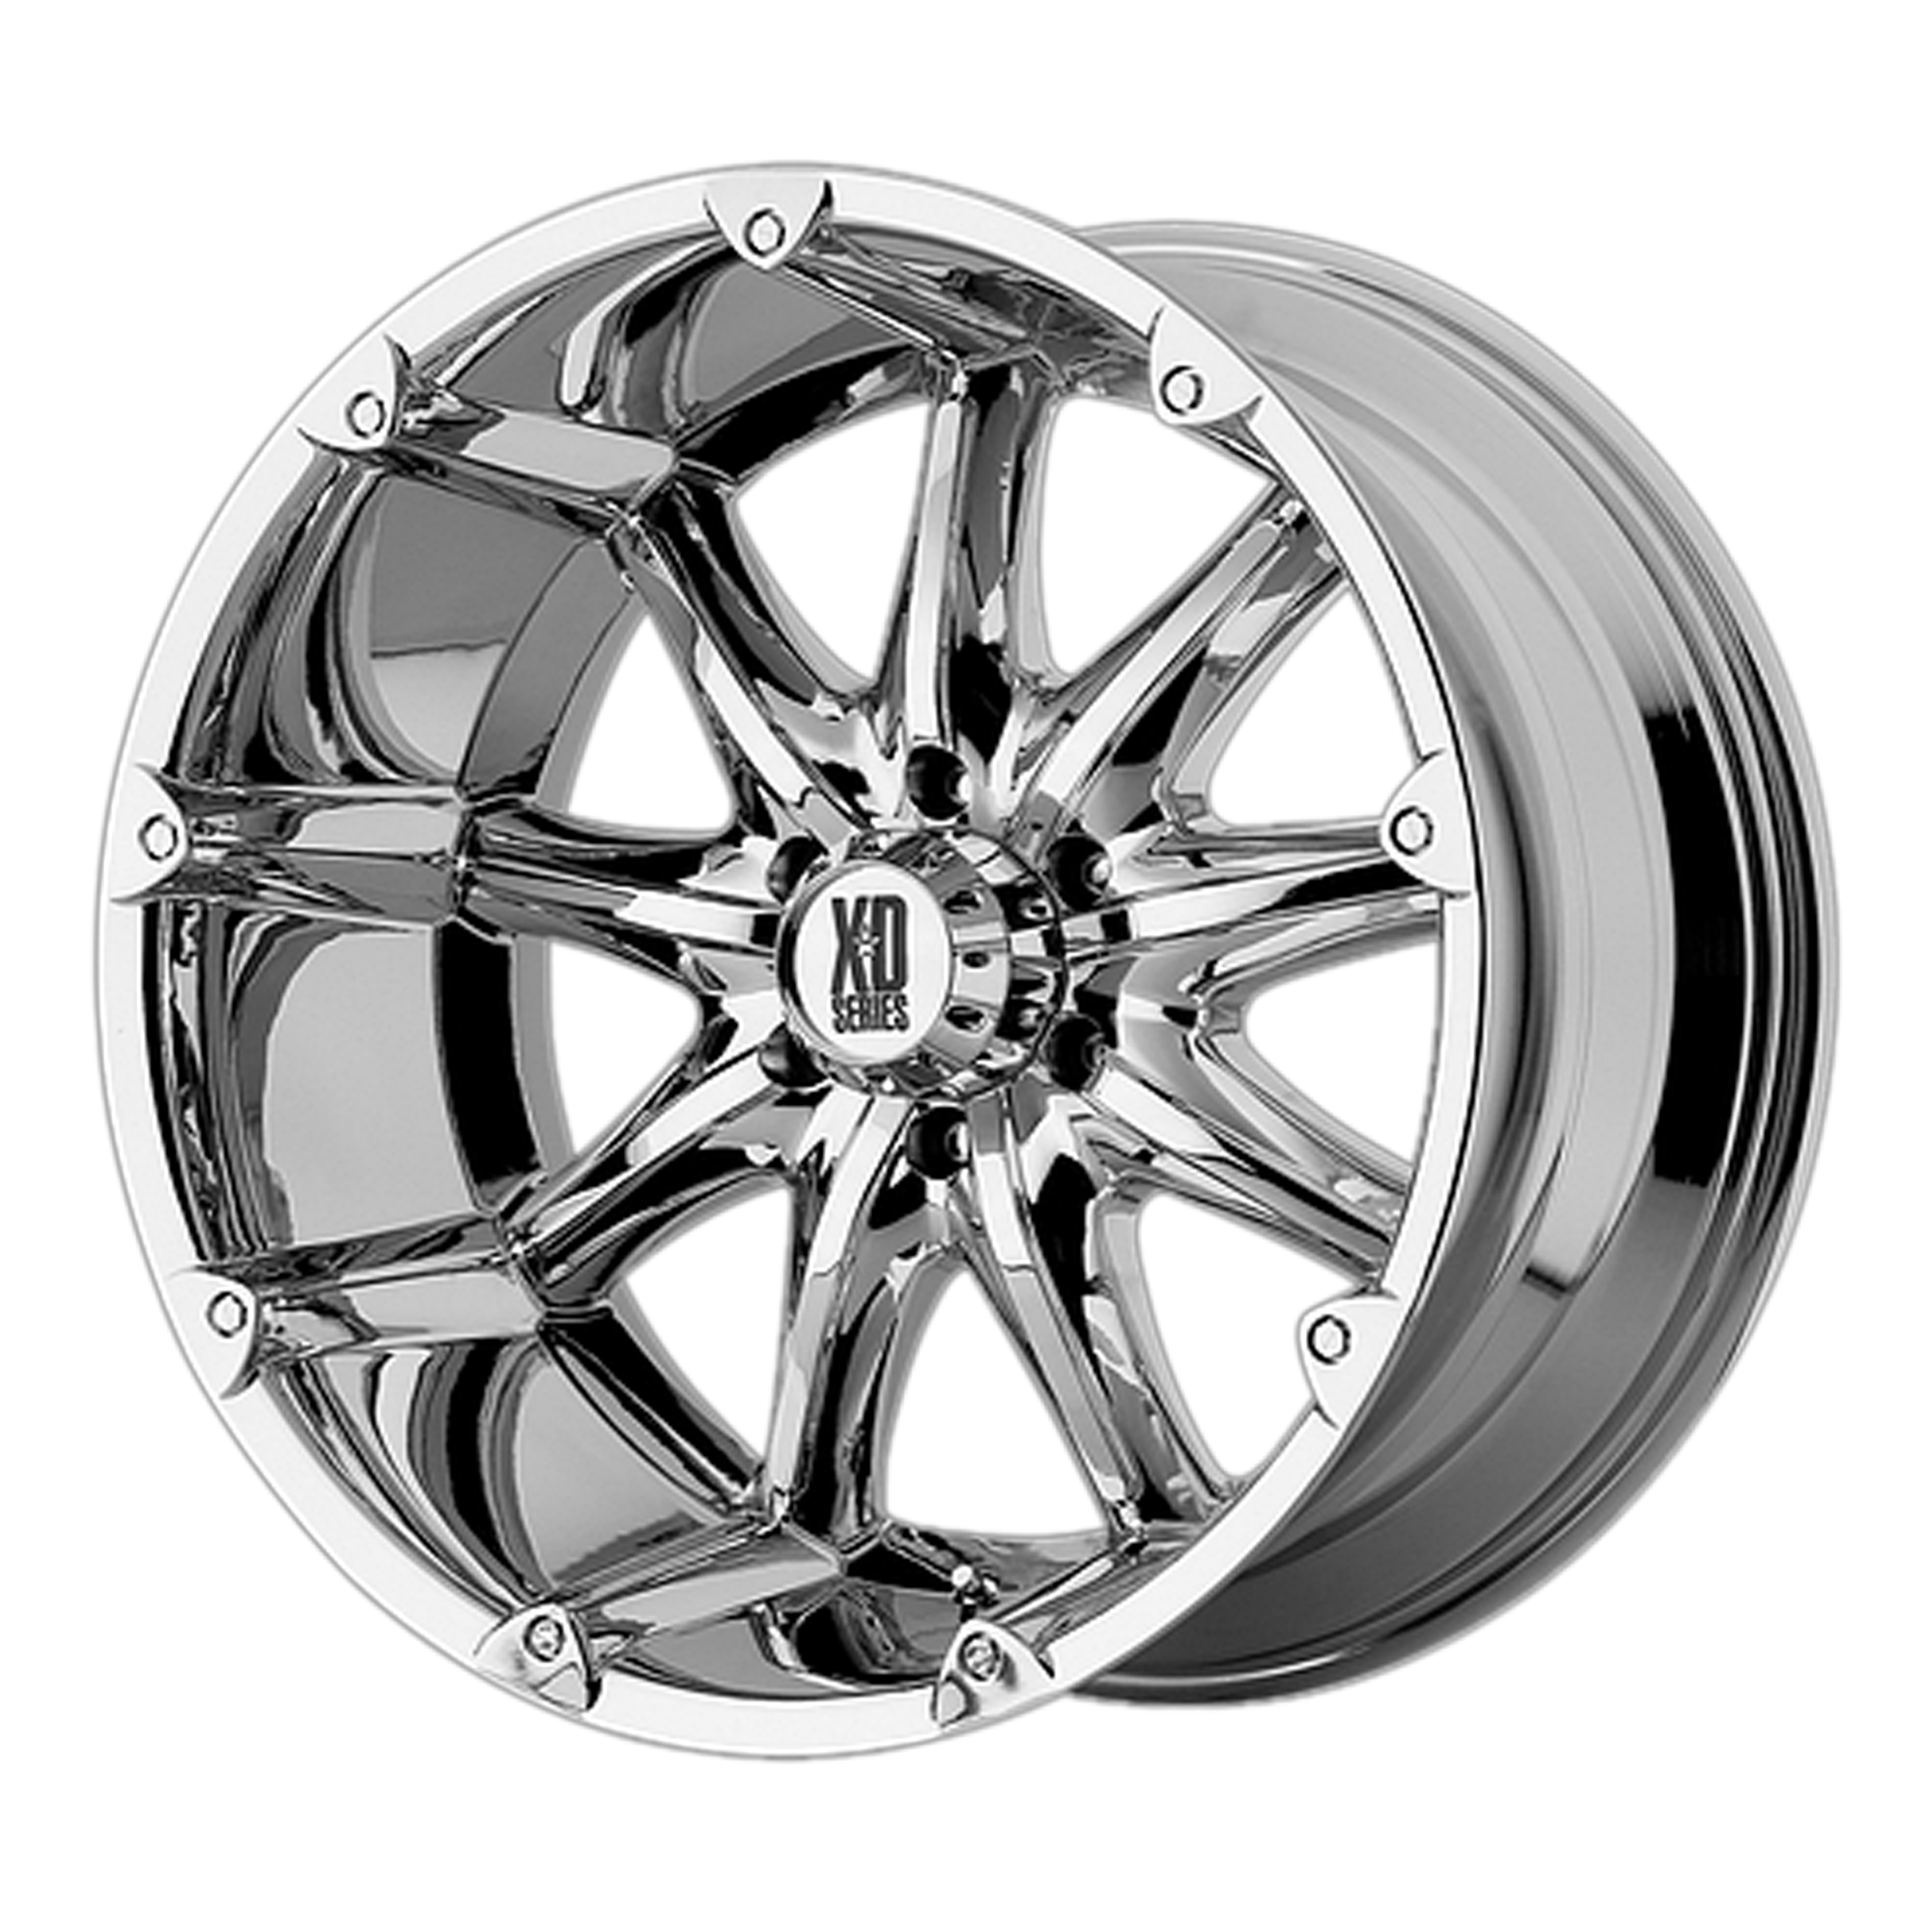 BADLANDS 20x9 5x127.00 CHROME (-12 mm) - Tires and Engine Performance